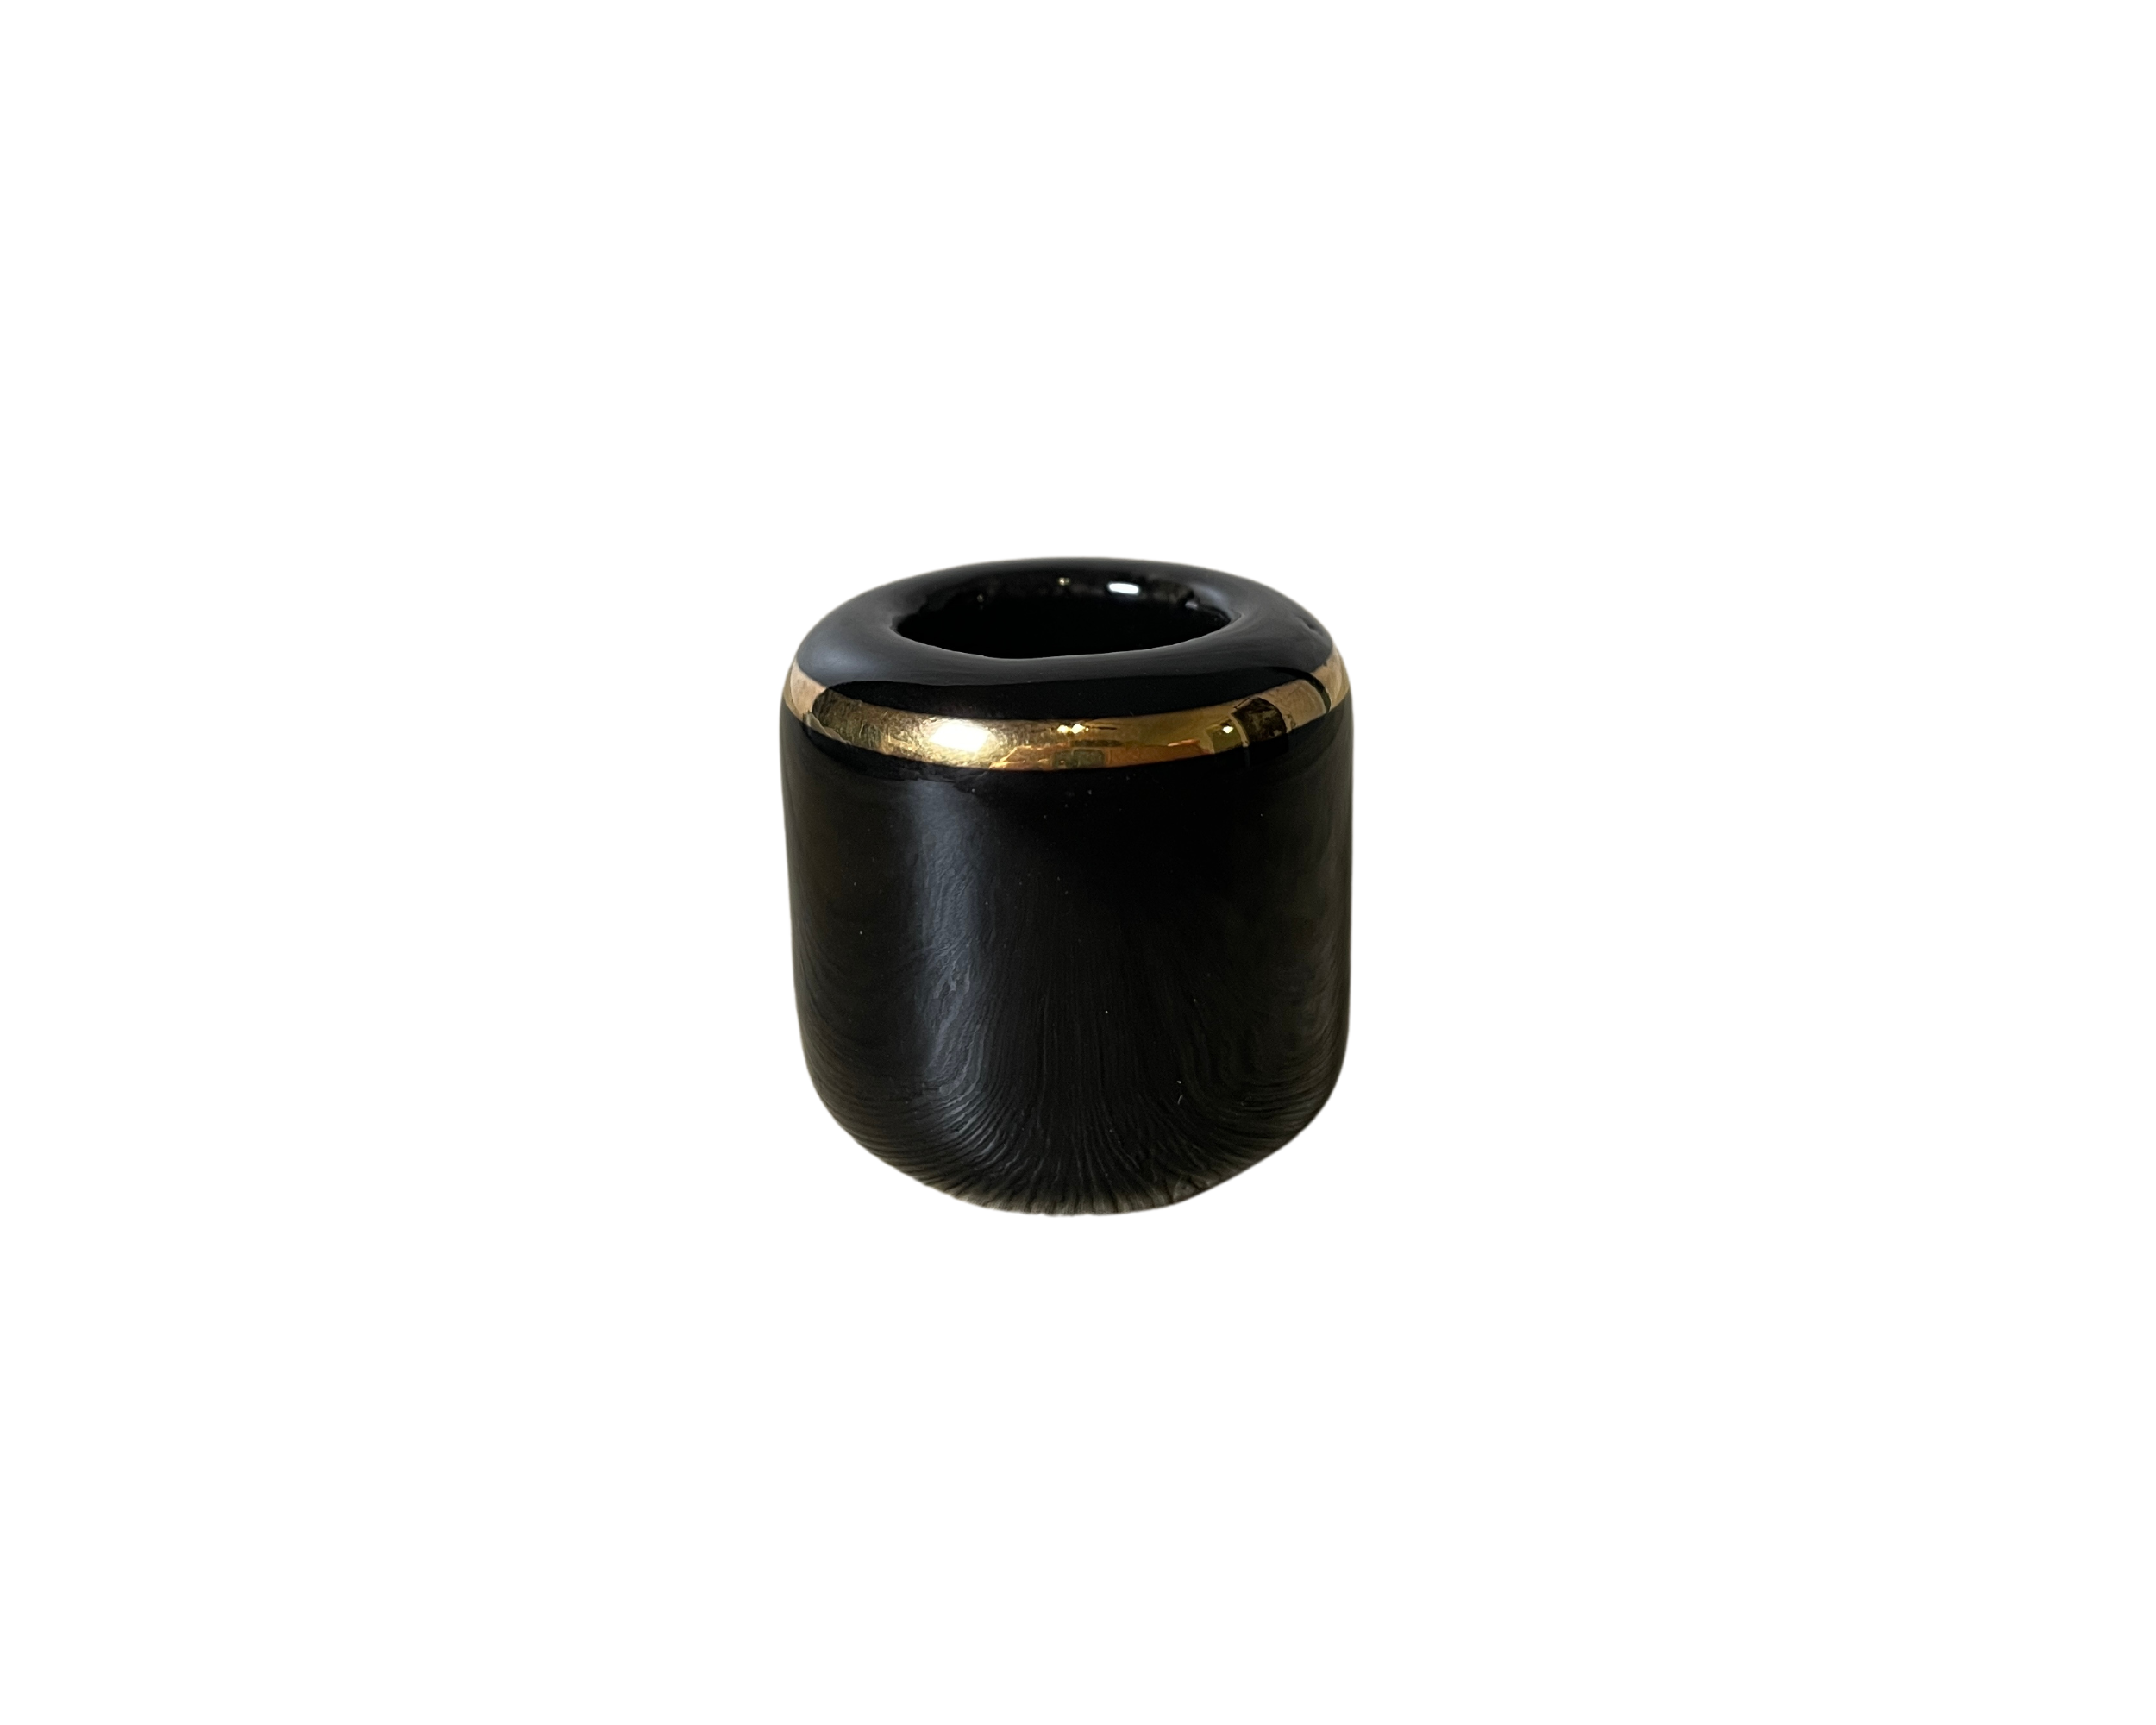 Buy Online Latest and Unique Black Chime Candle Holder - Ceramic with Gold Band | Shop Best Spiritual Items - The Mystical Ritual